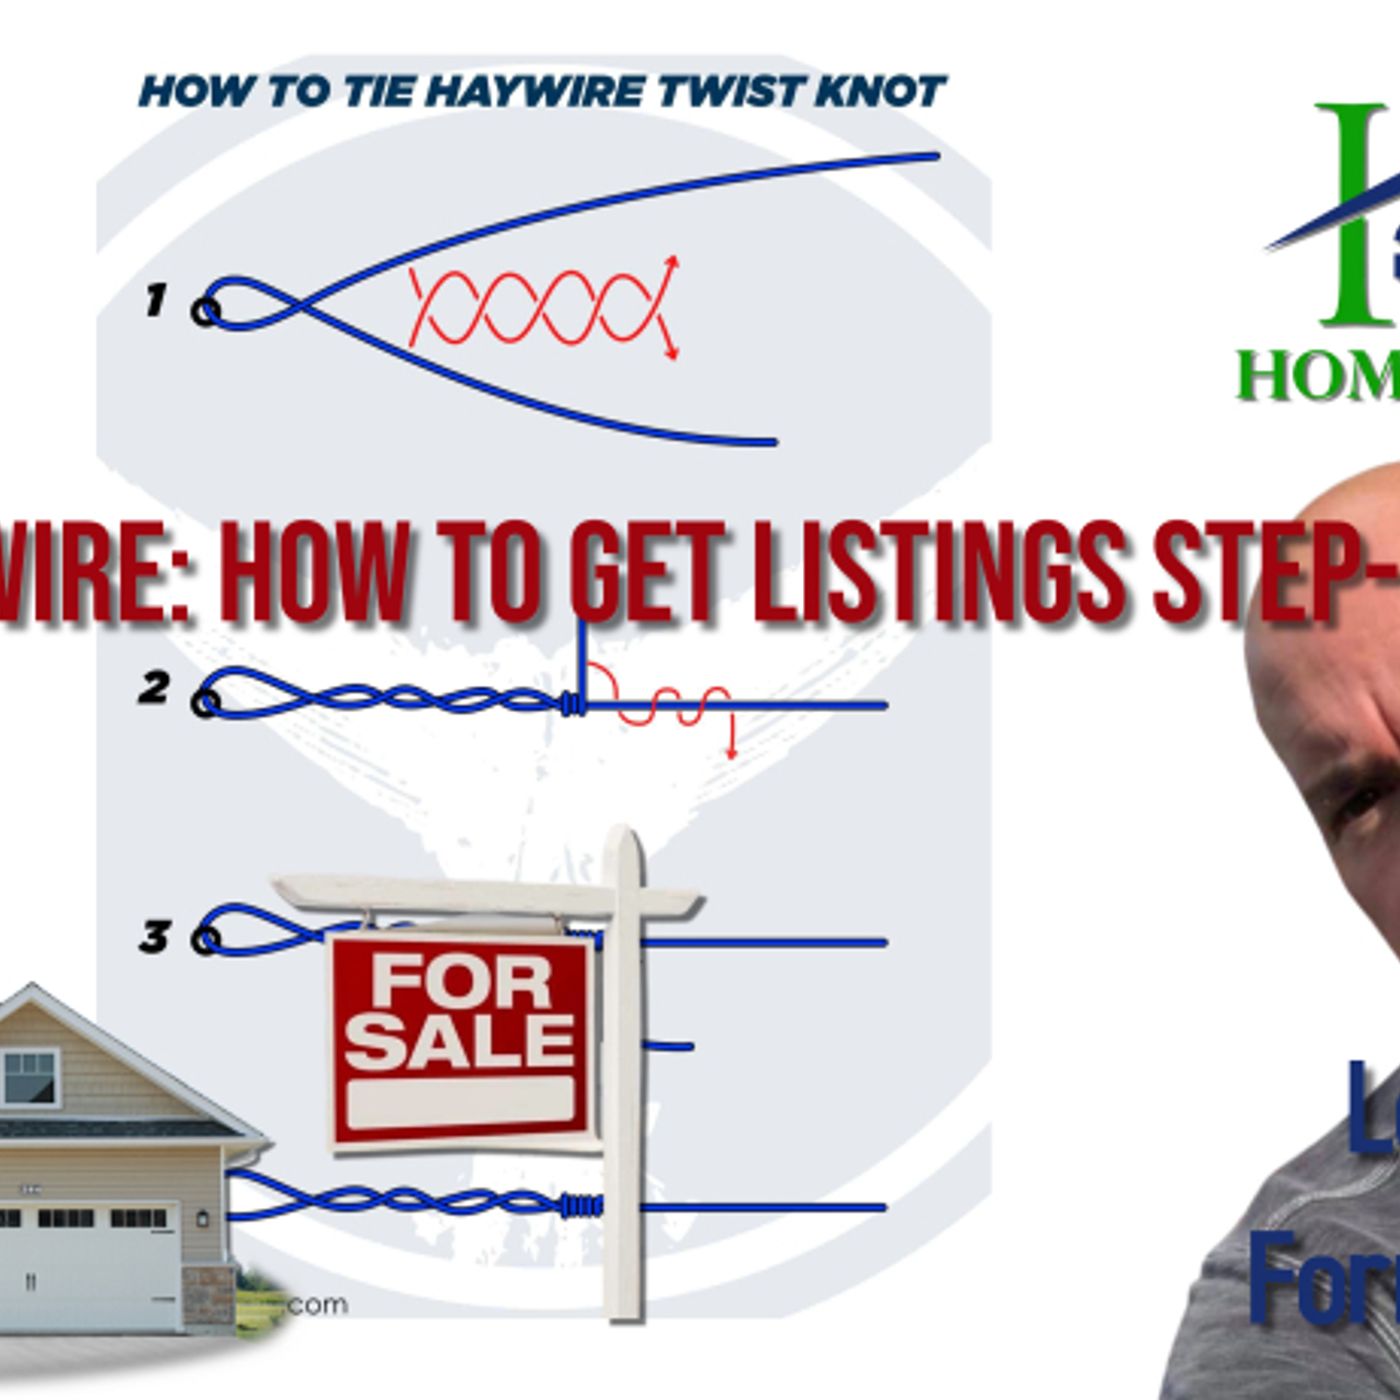 11/24/21 HAYWIRE: How to get listings Step-by-step